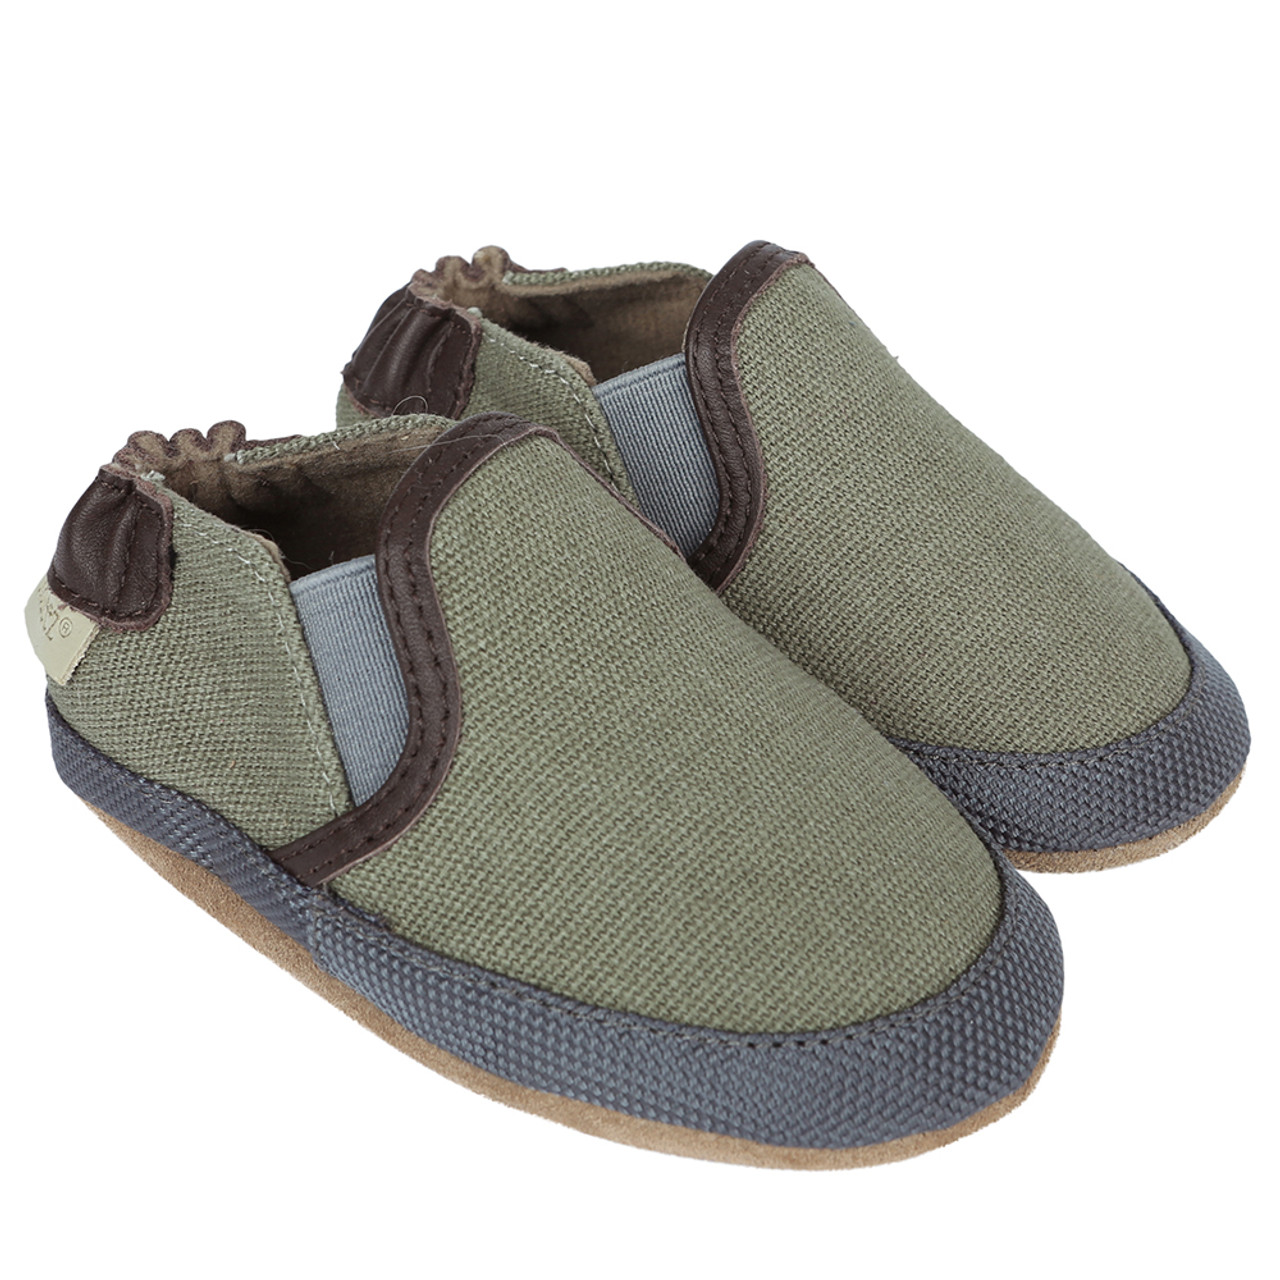 soft soled shoes for babies